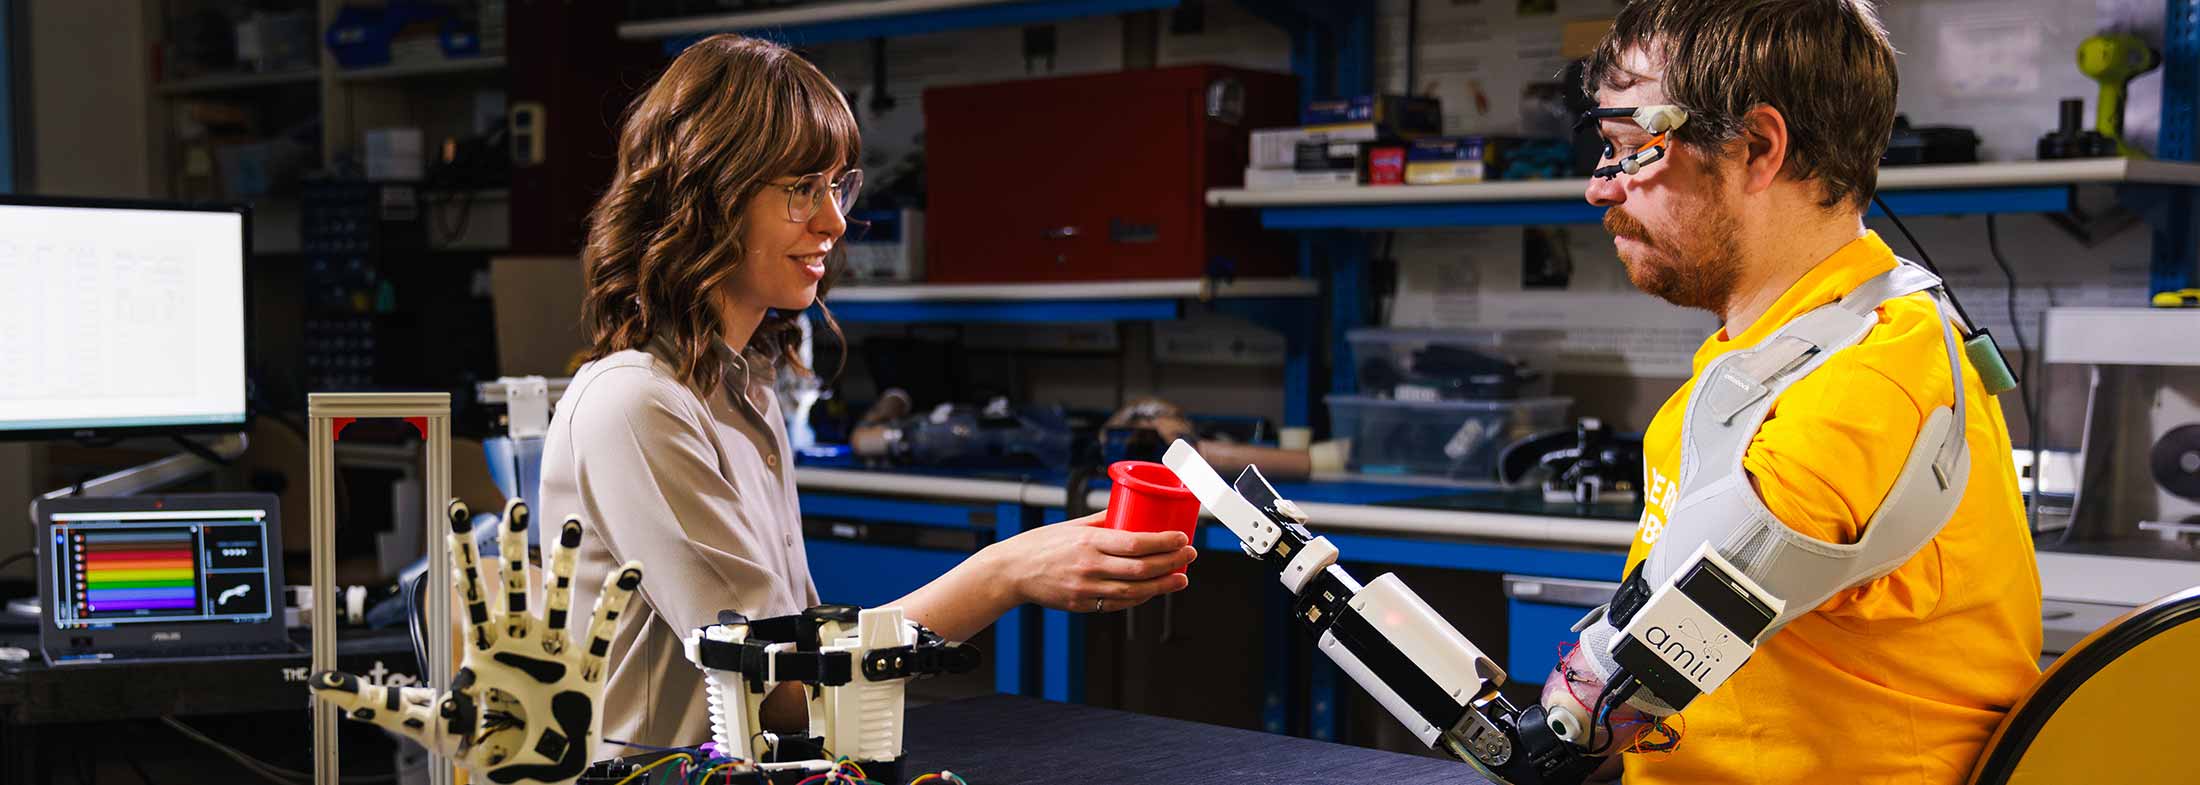 Amii roboticist works with a client with a robotic arm